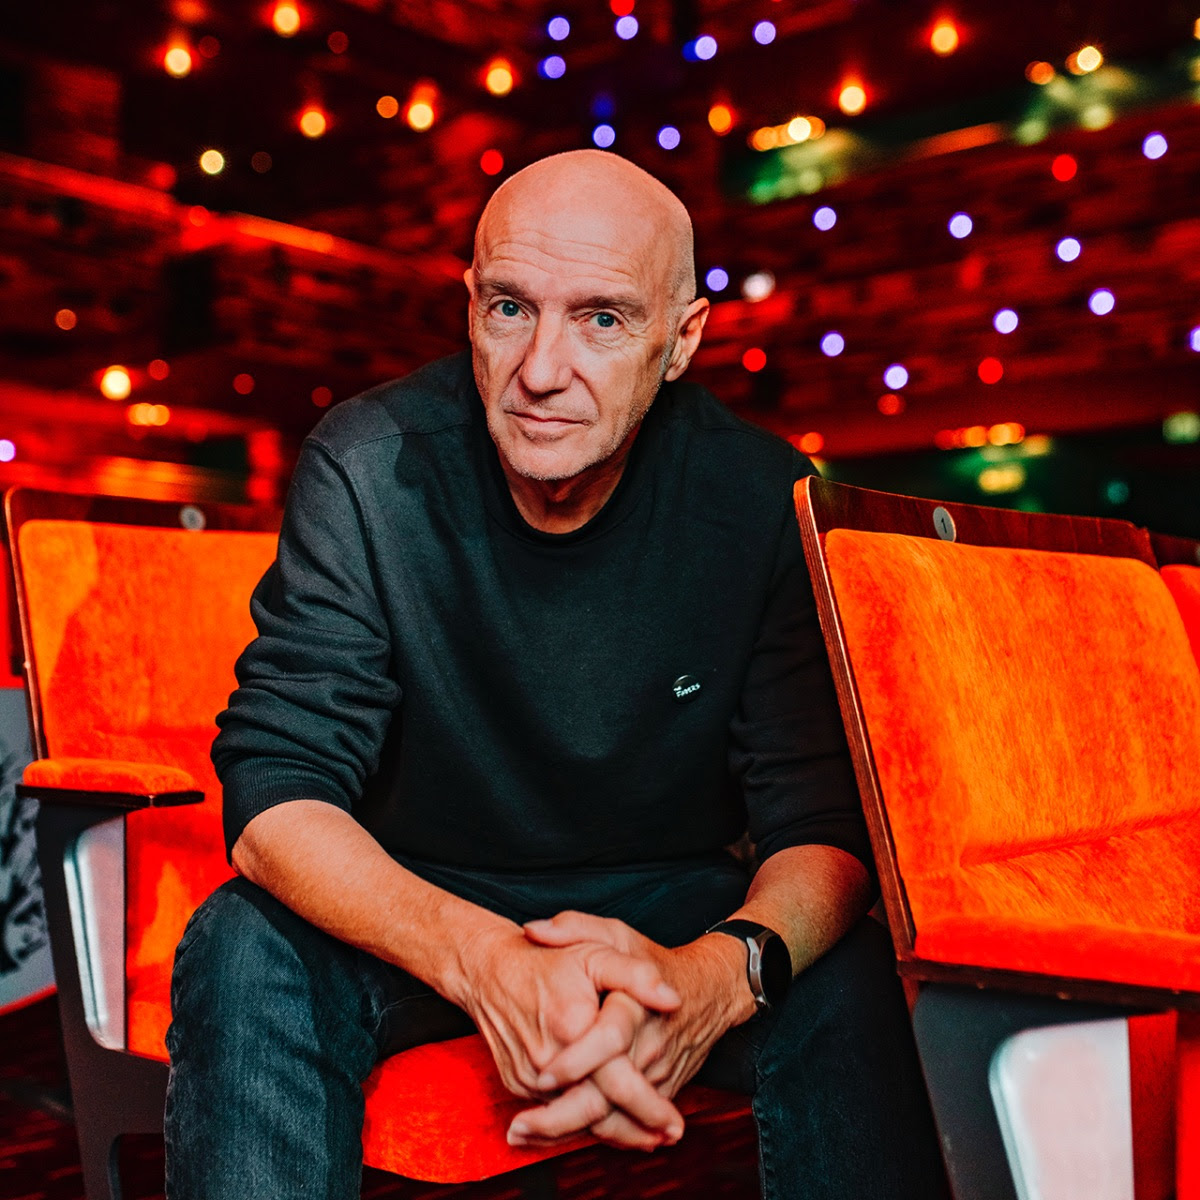 Midge Ure sitting in a red chair in an arena